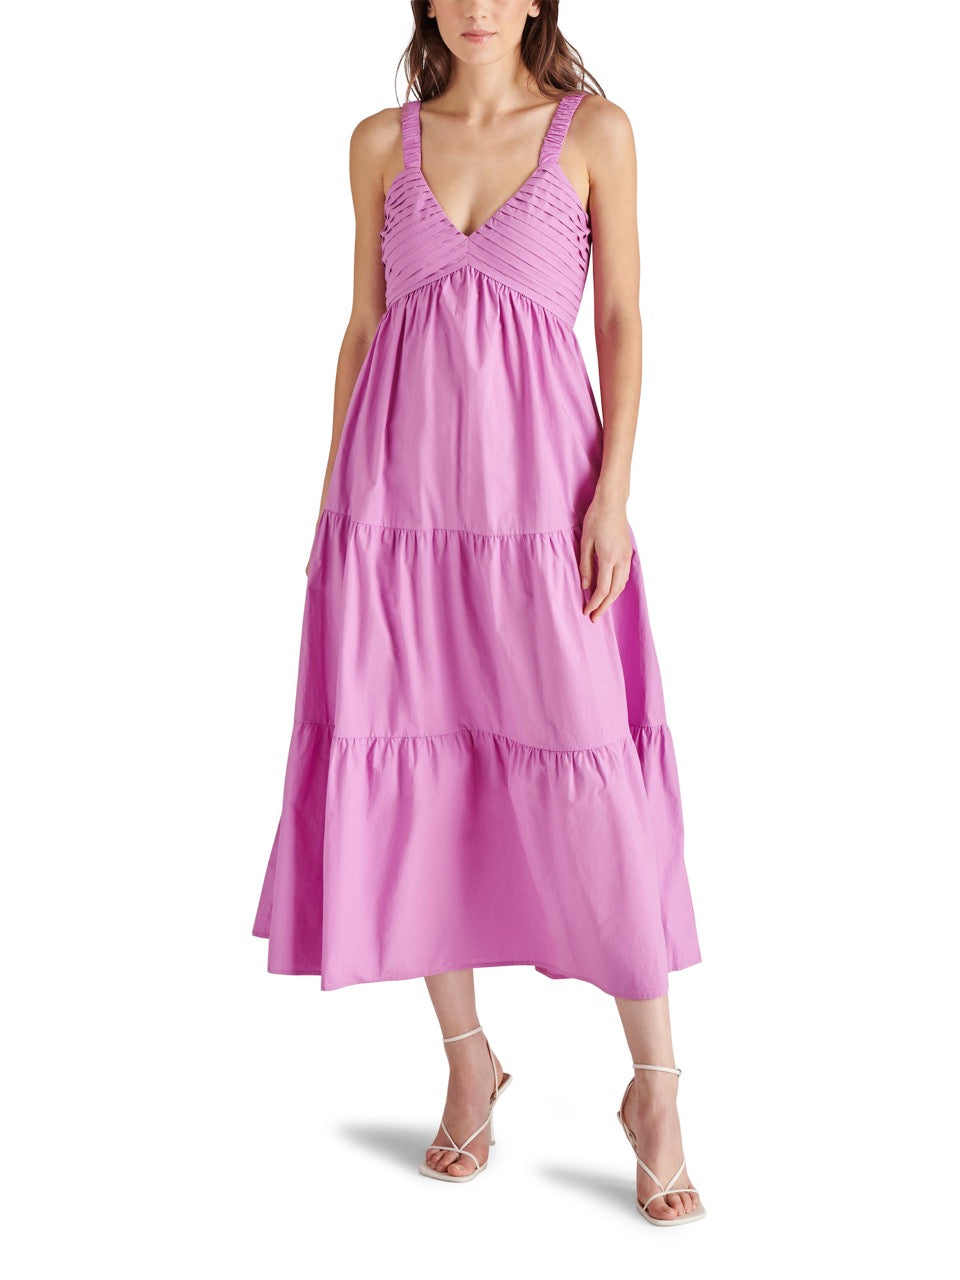 steve madden eliora solid sleeveless maxi dress in berry-front view